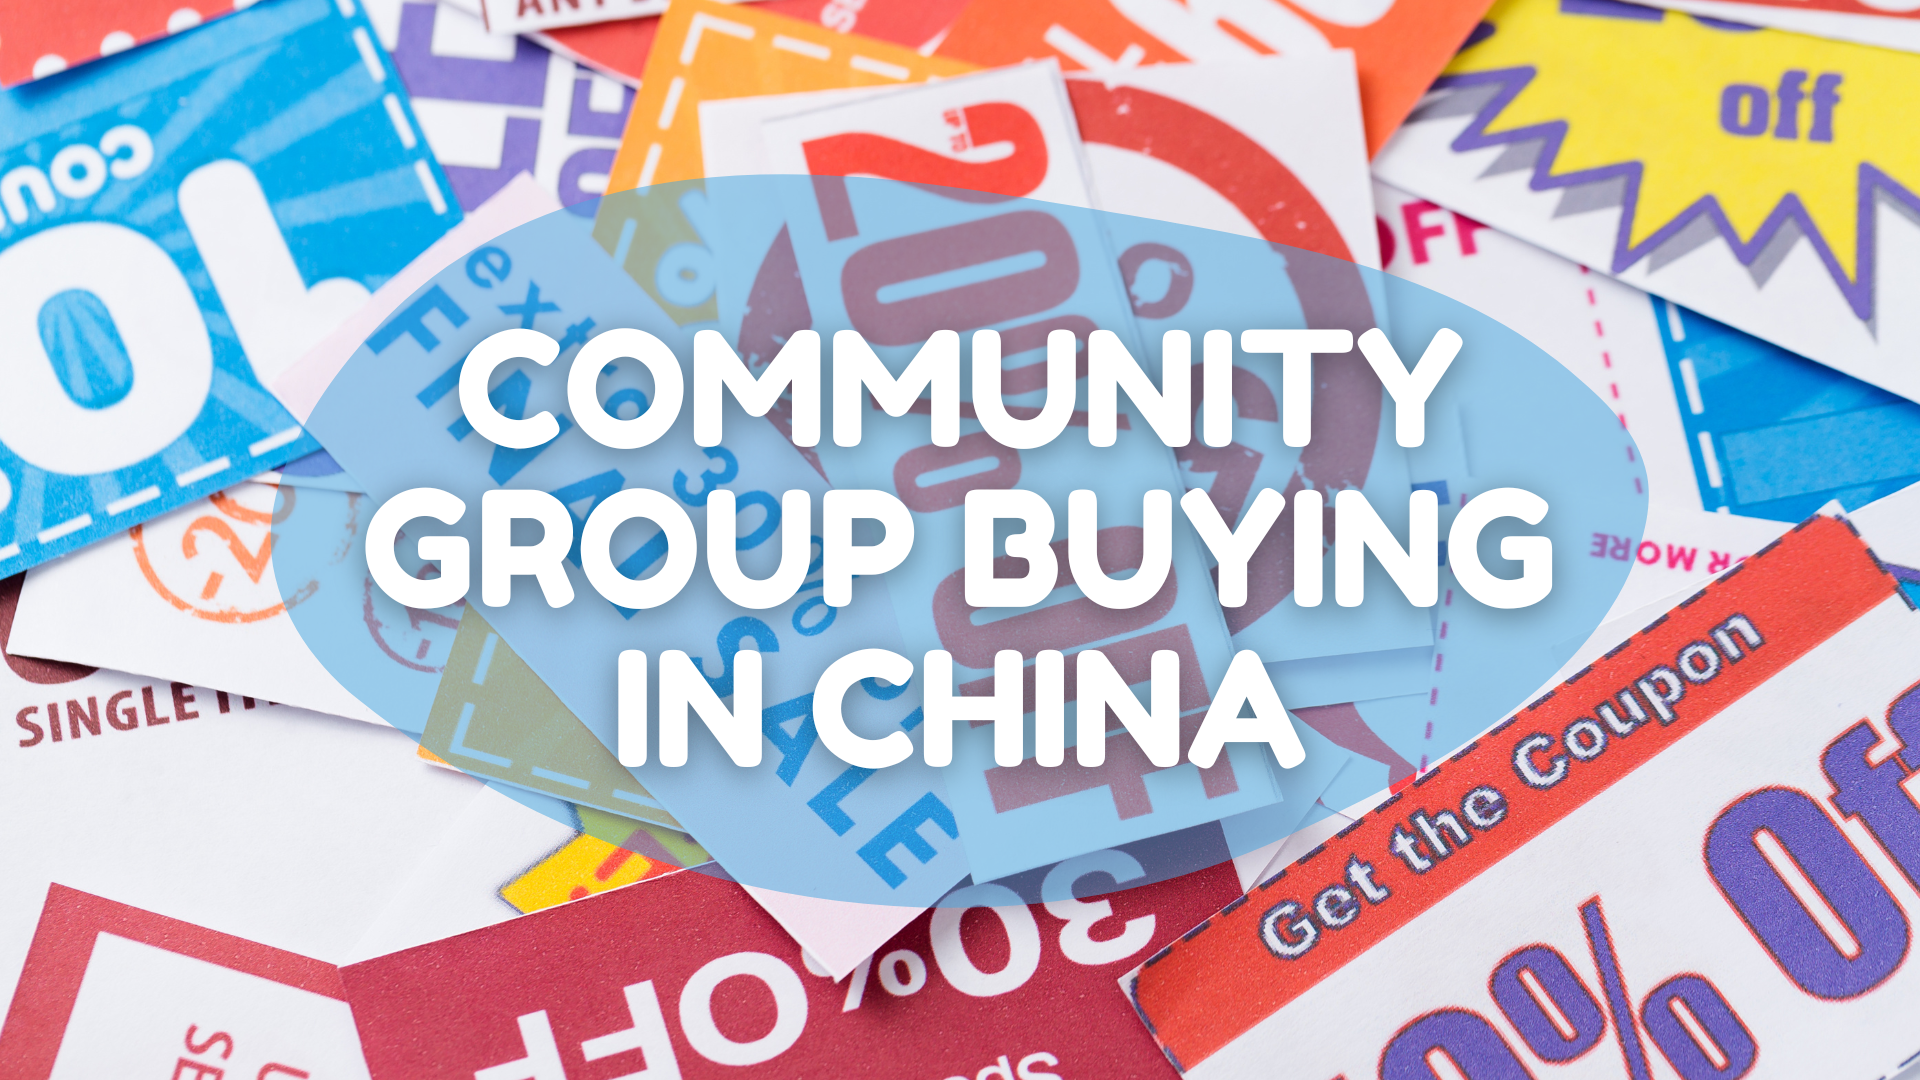 Community group buying in China